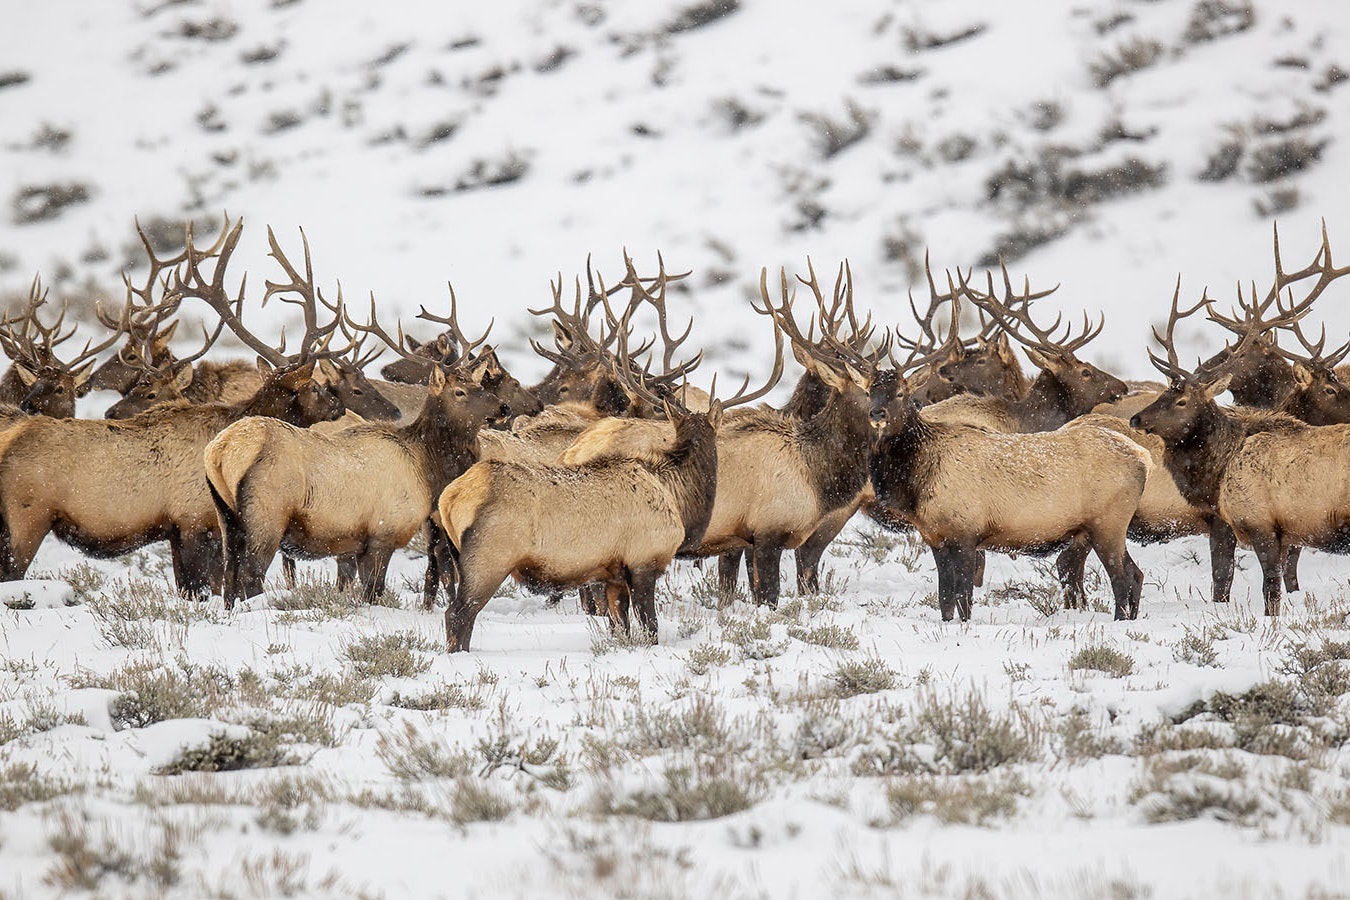 A herd of elk stand close together on a snowy Wyoming range.